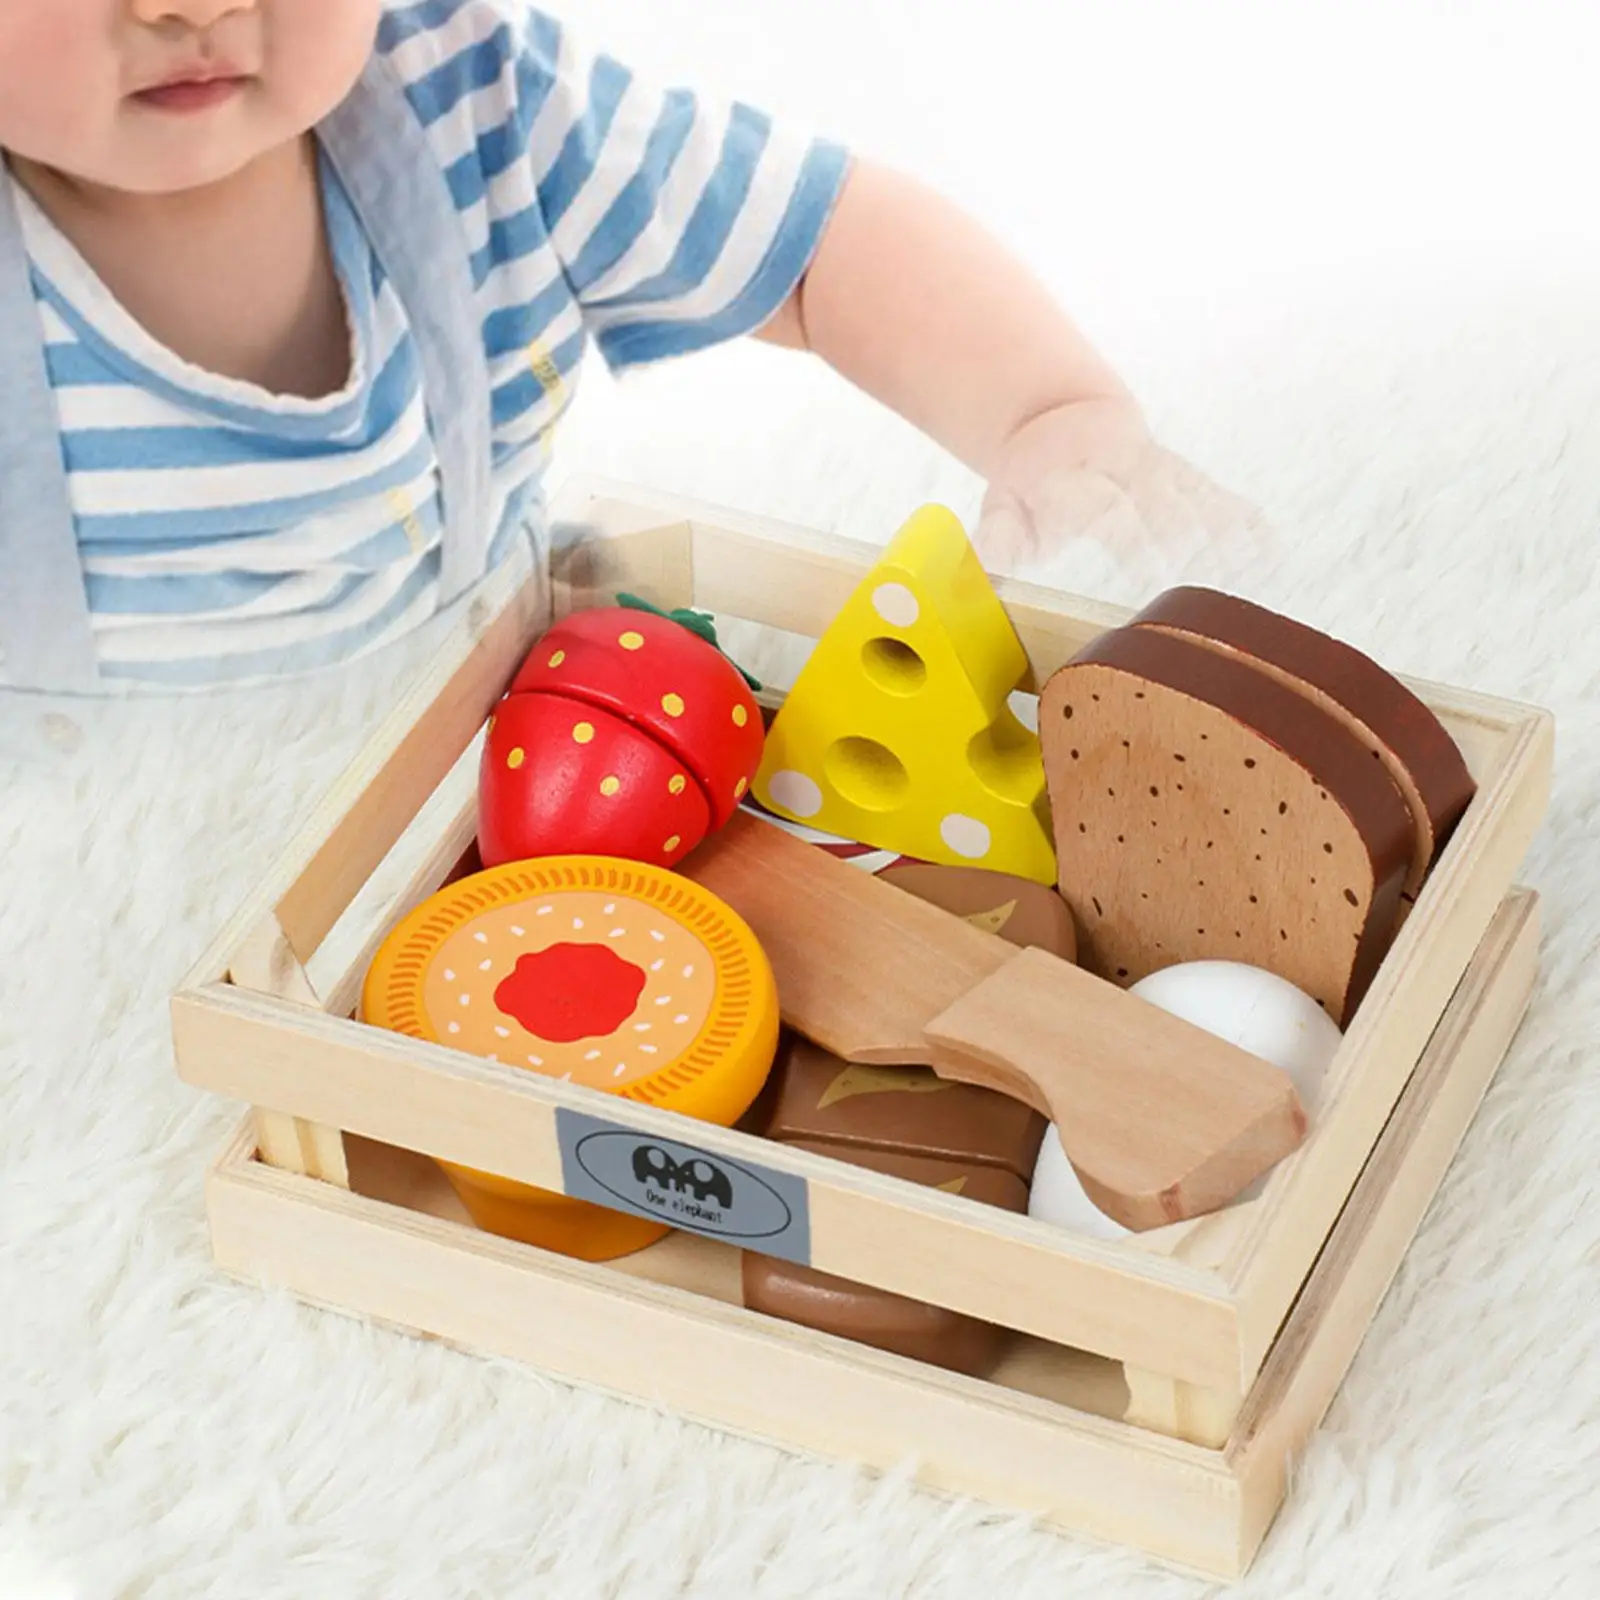 Simulation Kitchen Pretend Toy Role Play Montessori Educational Toy Cutting Play Food Toy for Toddler Baby Birthday Easter Gifts